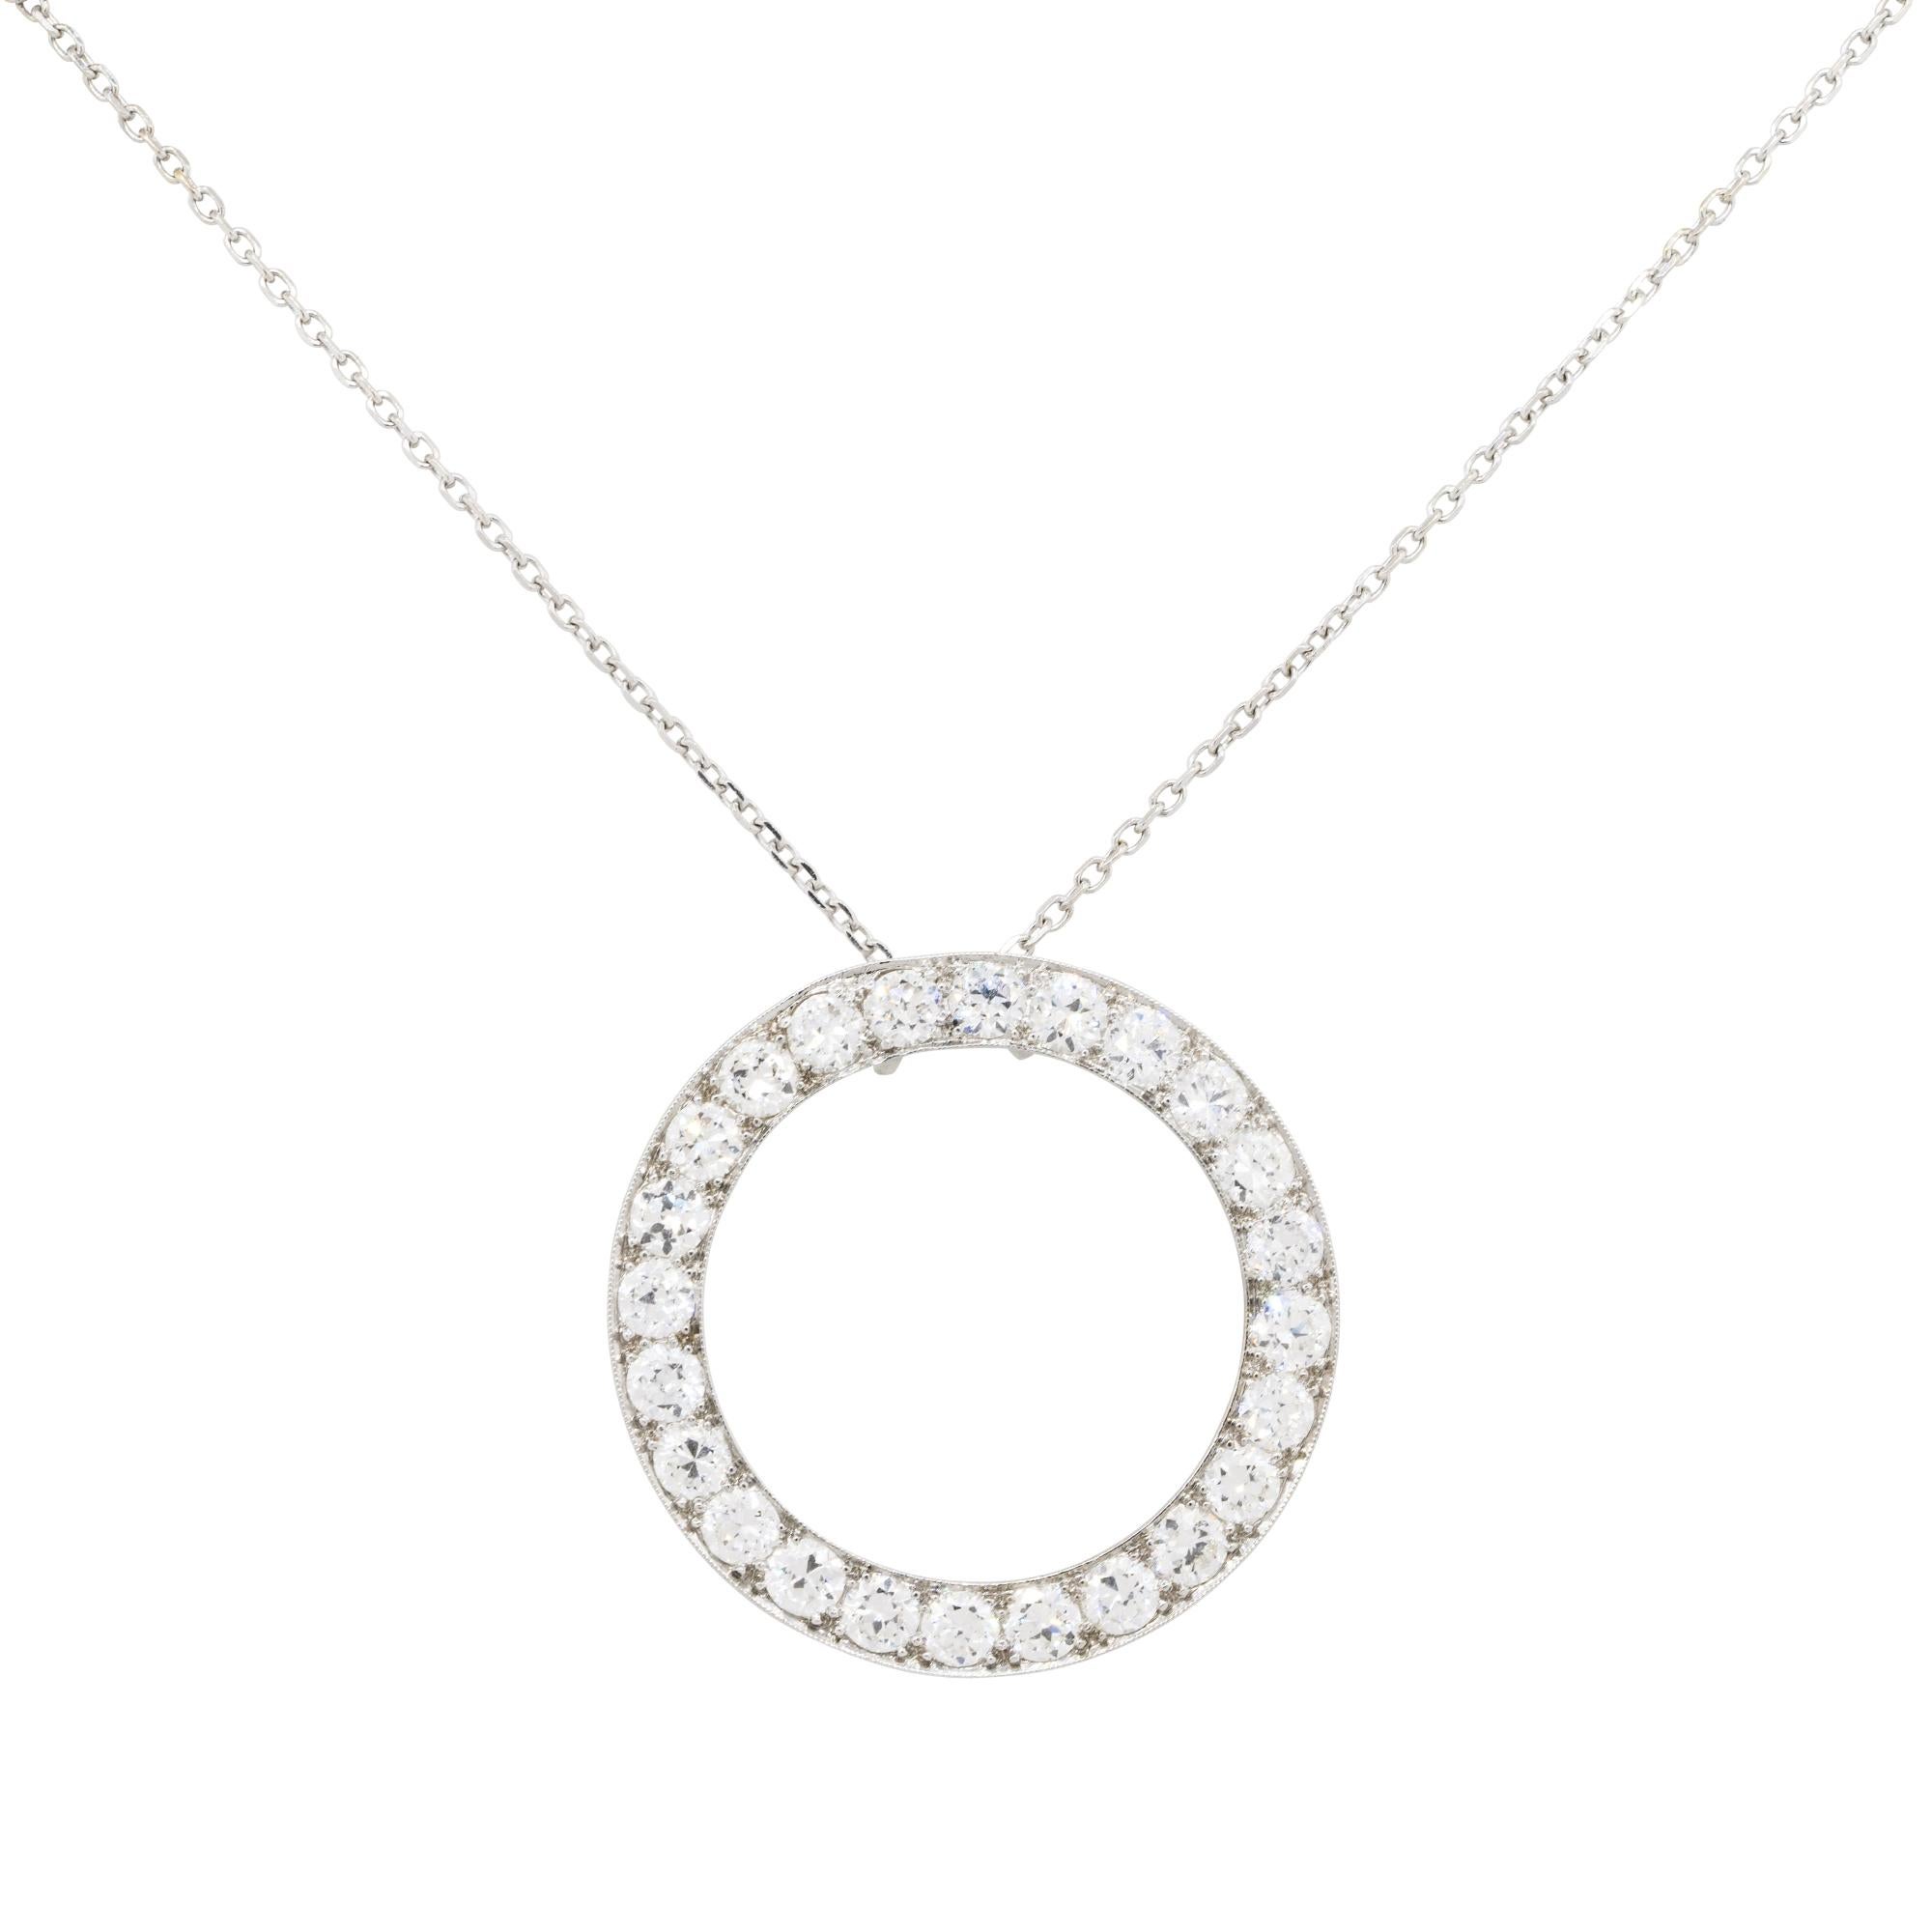 14k White Gold 2.4ctw Diamond Circle Pendant On Chain
Material: 14k White Gold
Diamond Details: Approximately 2.4ctw of Round Brilliant cut Diamonds. Diamonds are approximately G/H in color and VS in clarity
Clasps: Lobster Clasp
Total Weight: 6.2g